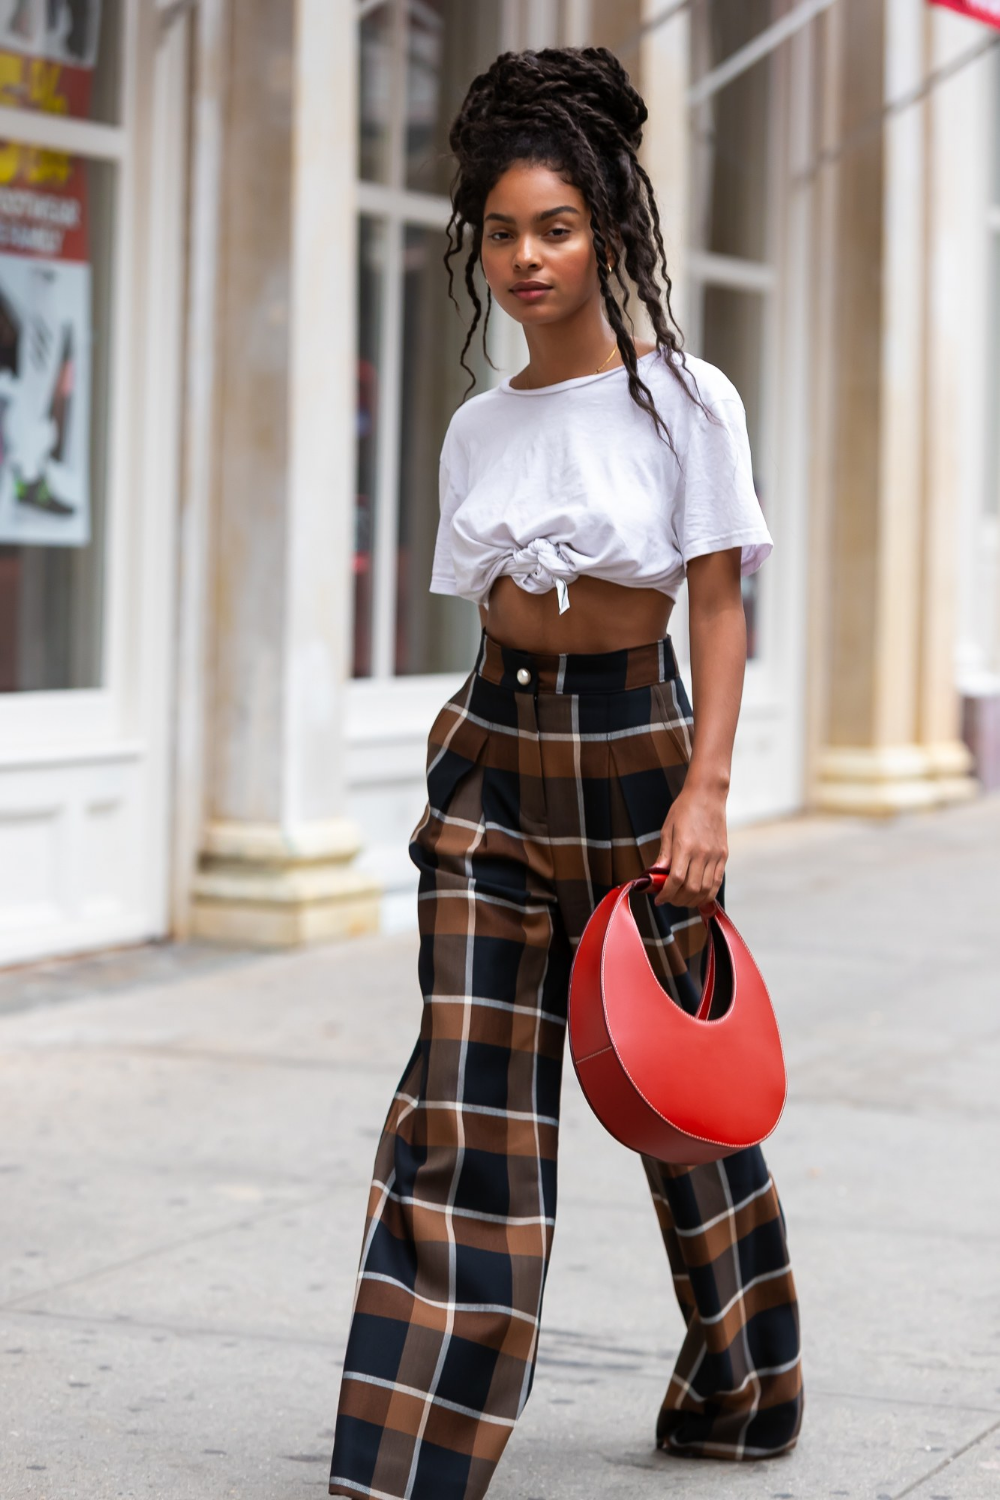 The Most Colorful (And Diverse) NYFW Street Style You've Been Waiting for - The Most Colorful (And Diverse) NYFW Street Style You've Been Waiting for -   17 fitness Style street ideas